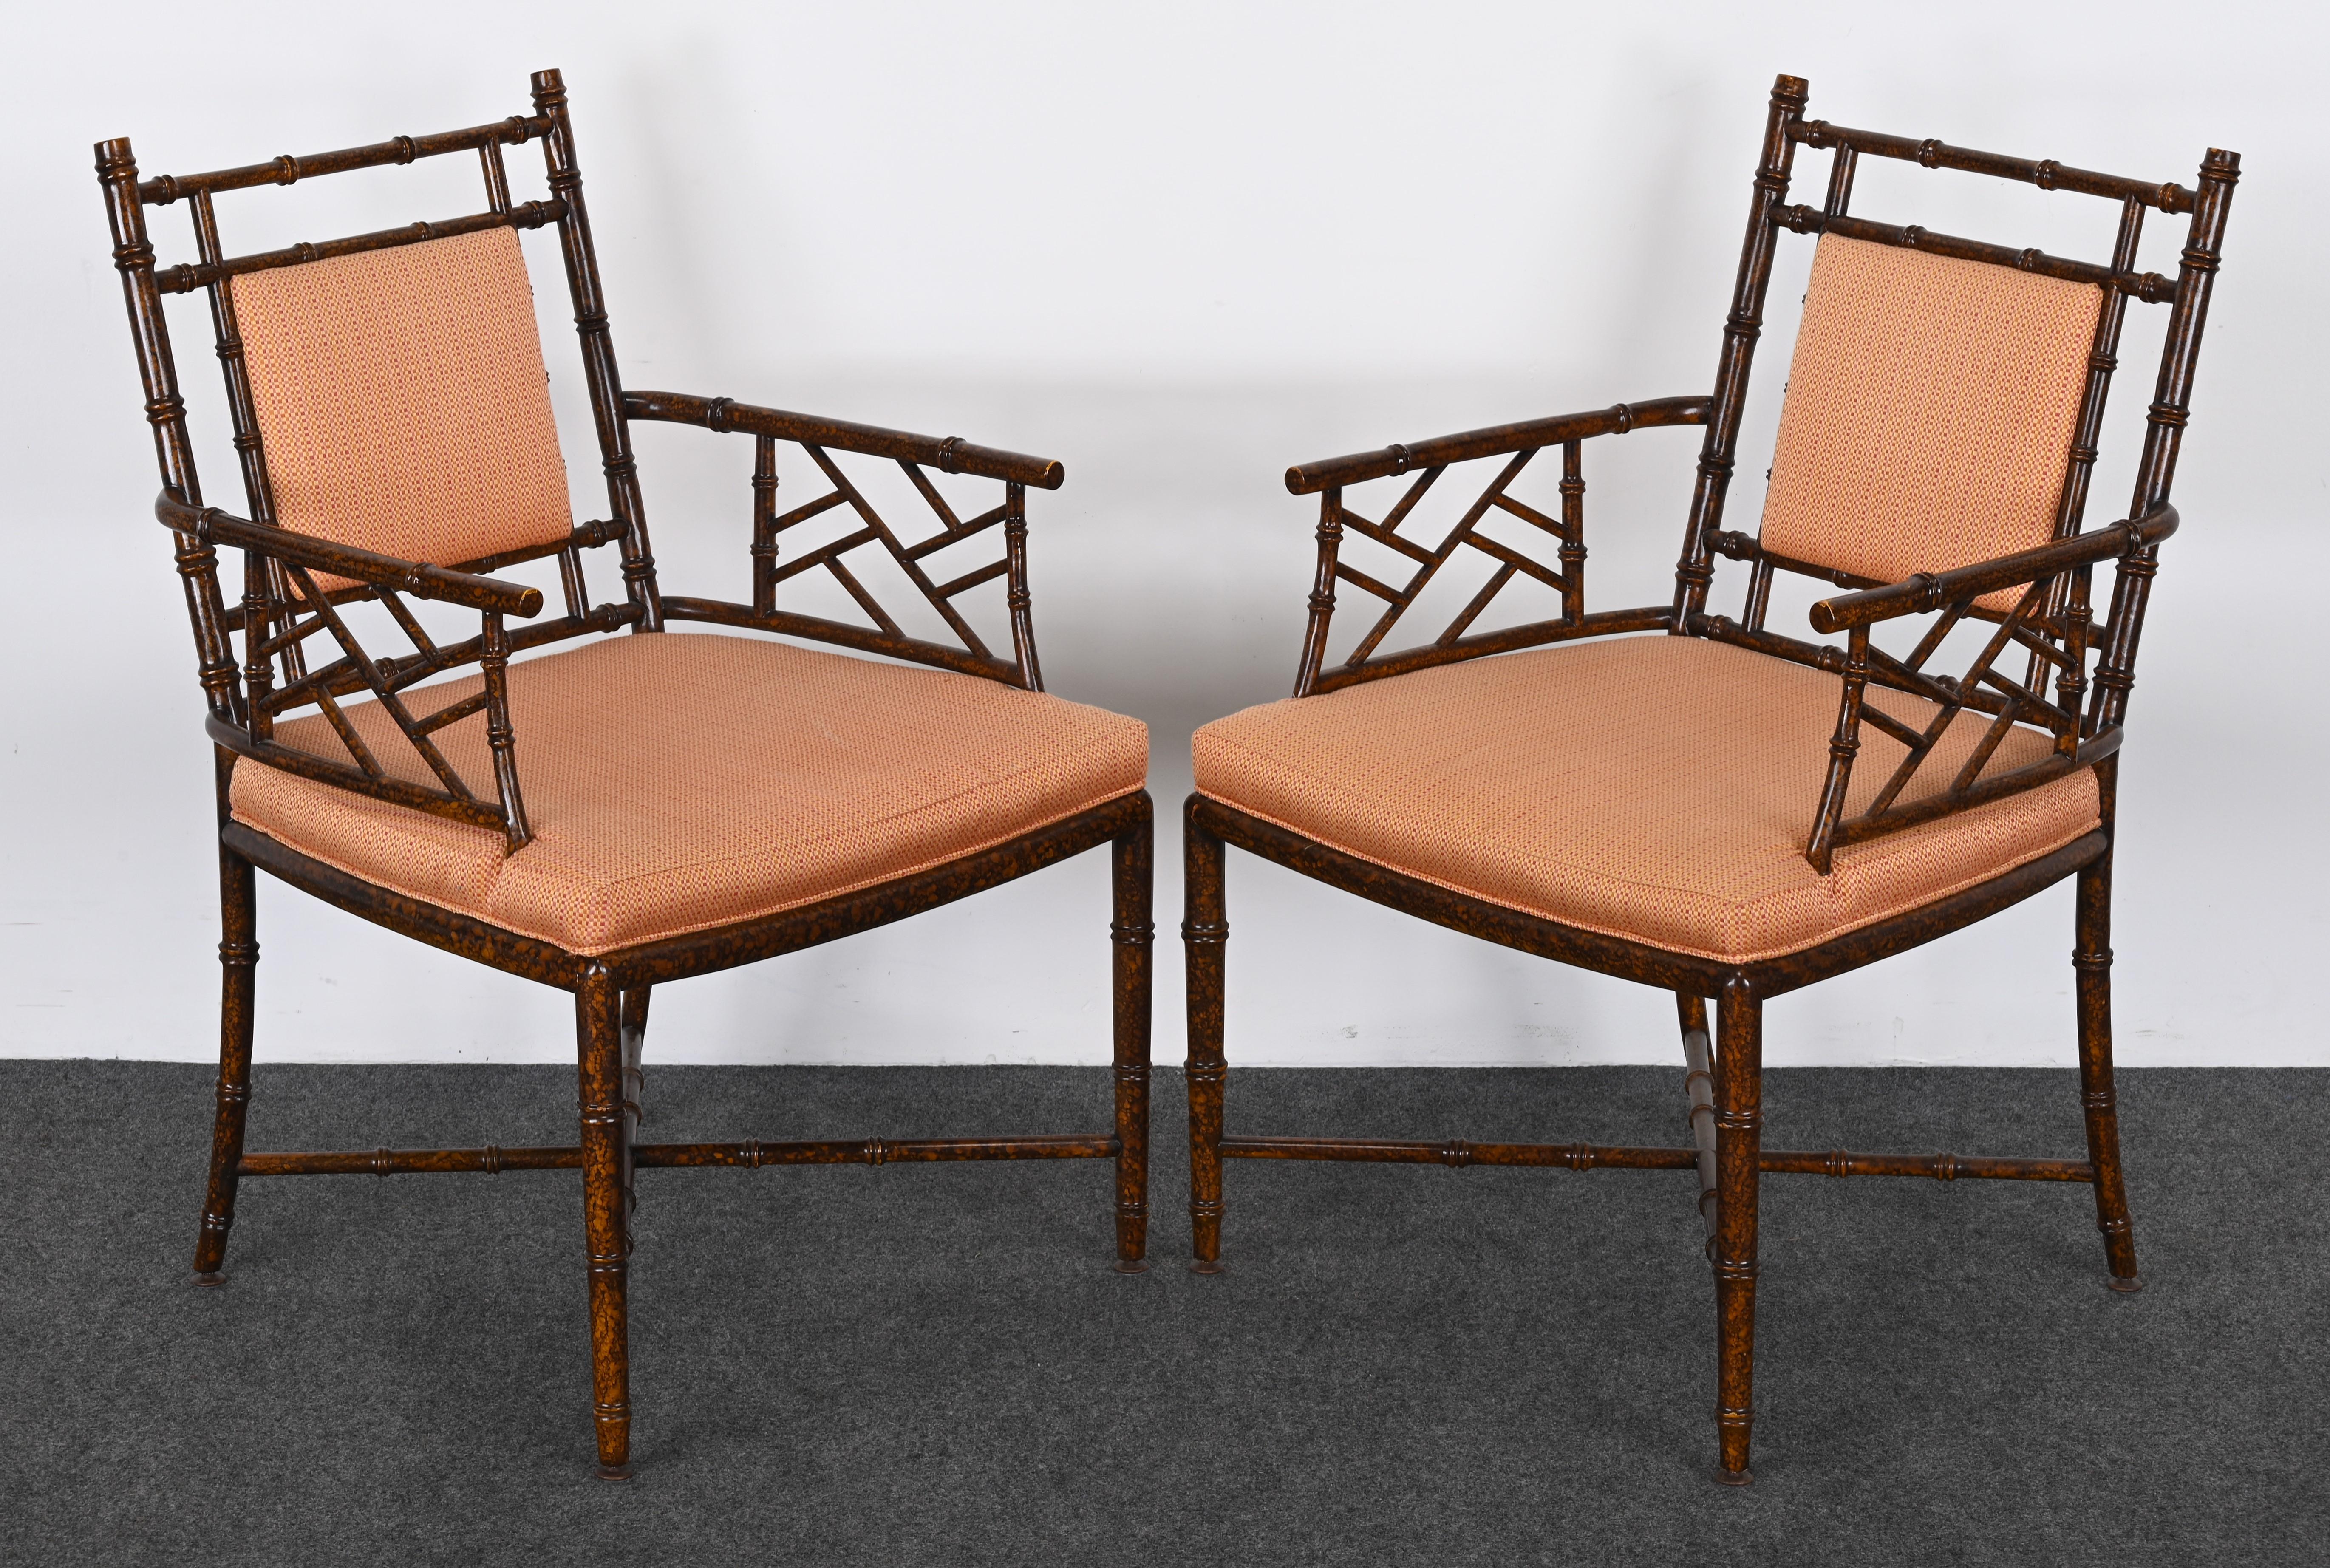 Pair of Faux Bamboo Chairs by Pearson In Good Condition For Sale In Hamburg, PA